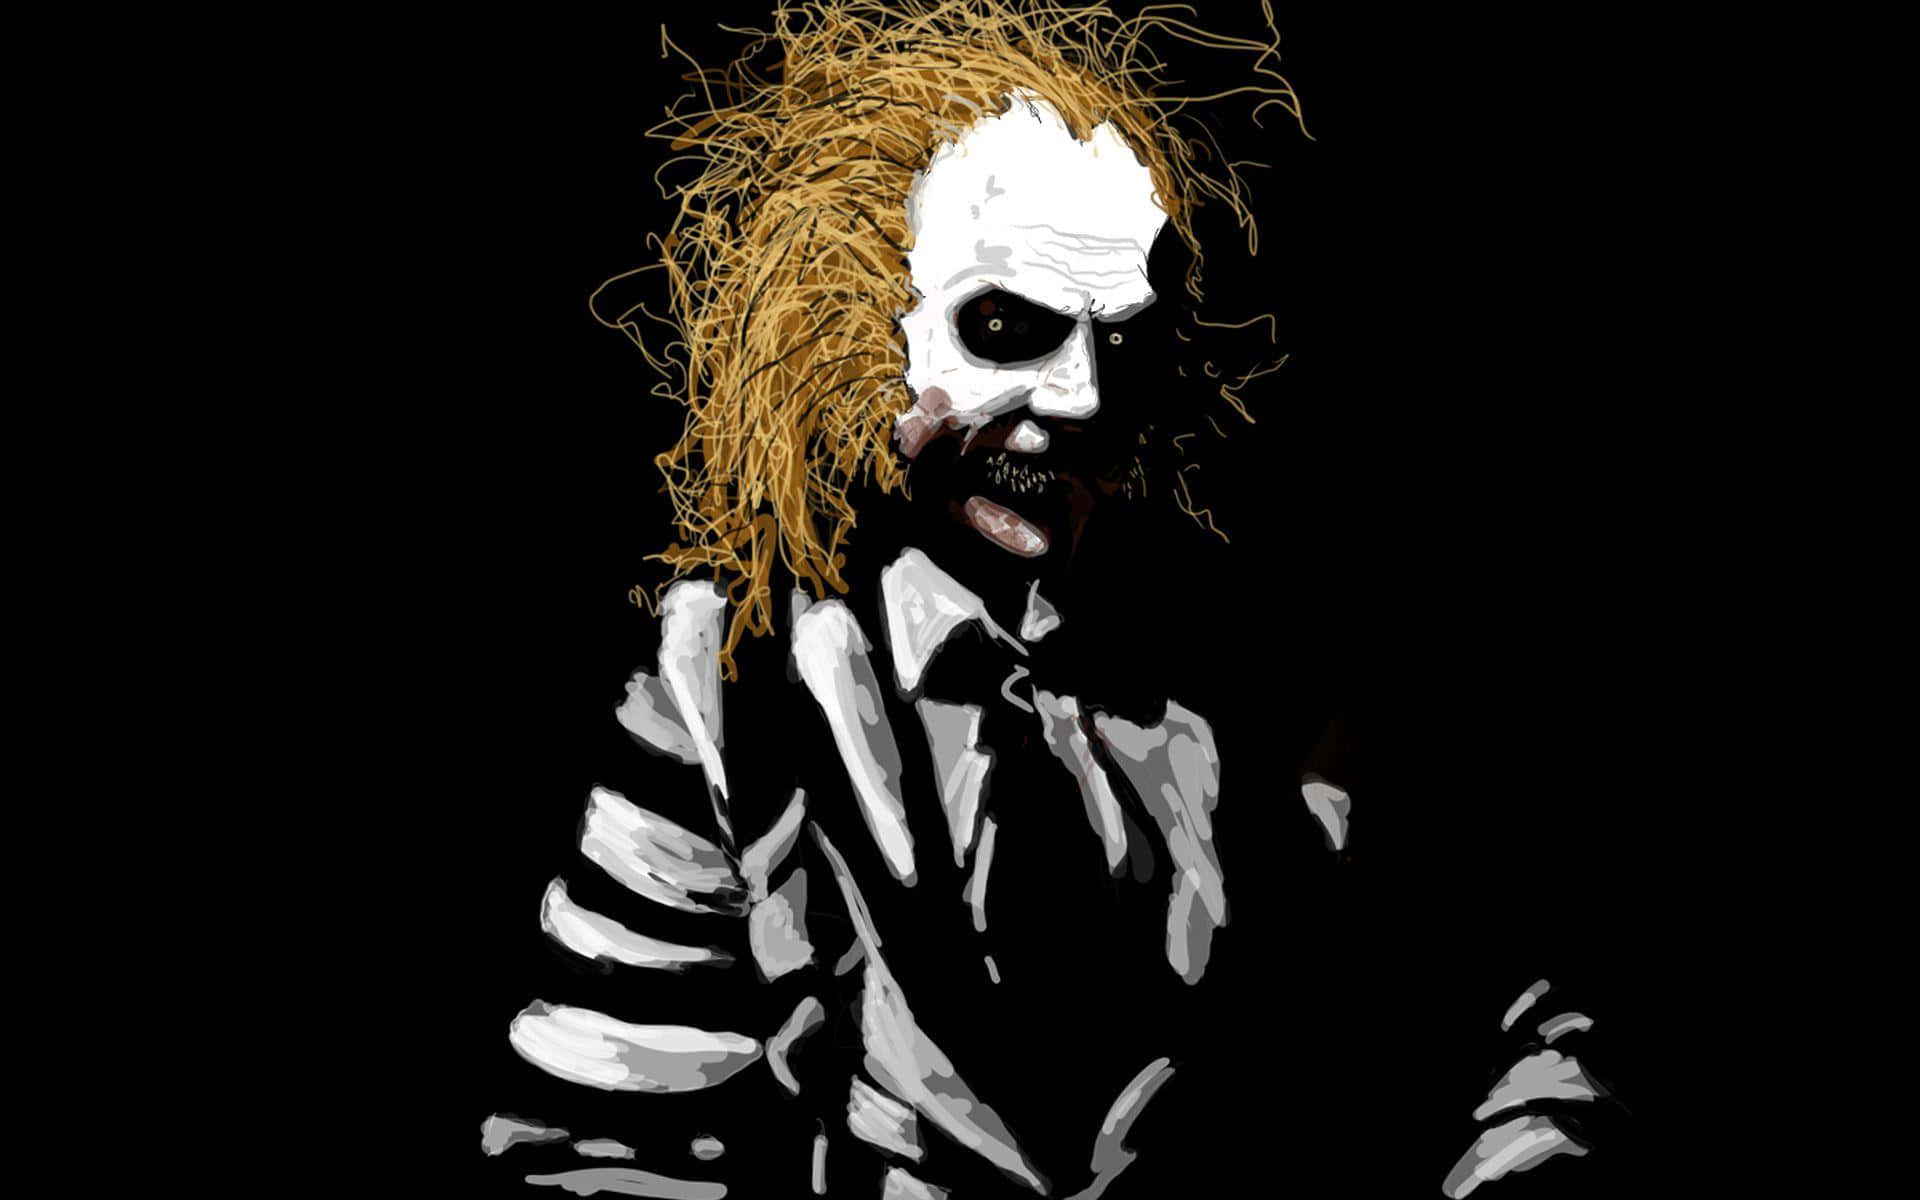 A Black And White Image Of A Clown With Long Hair